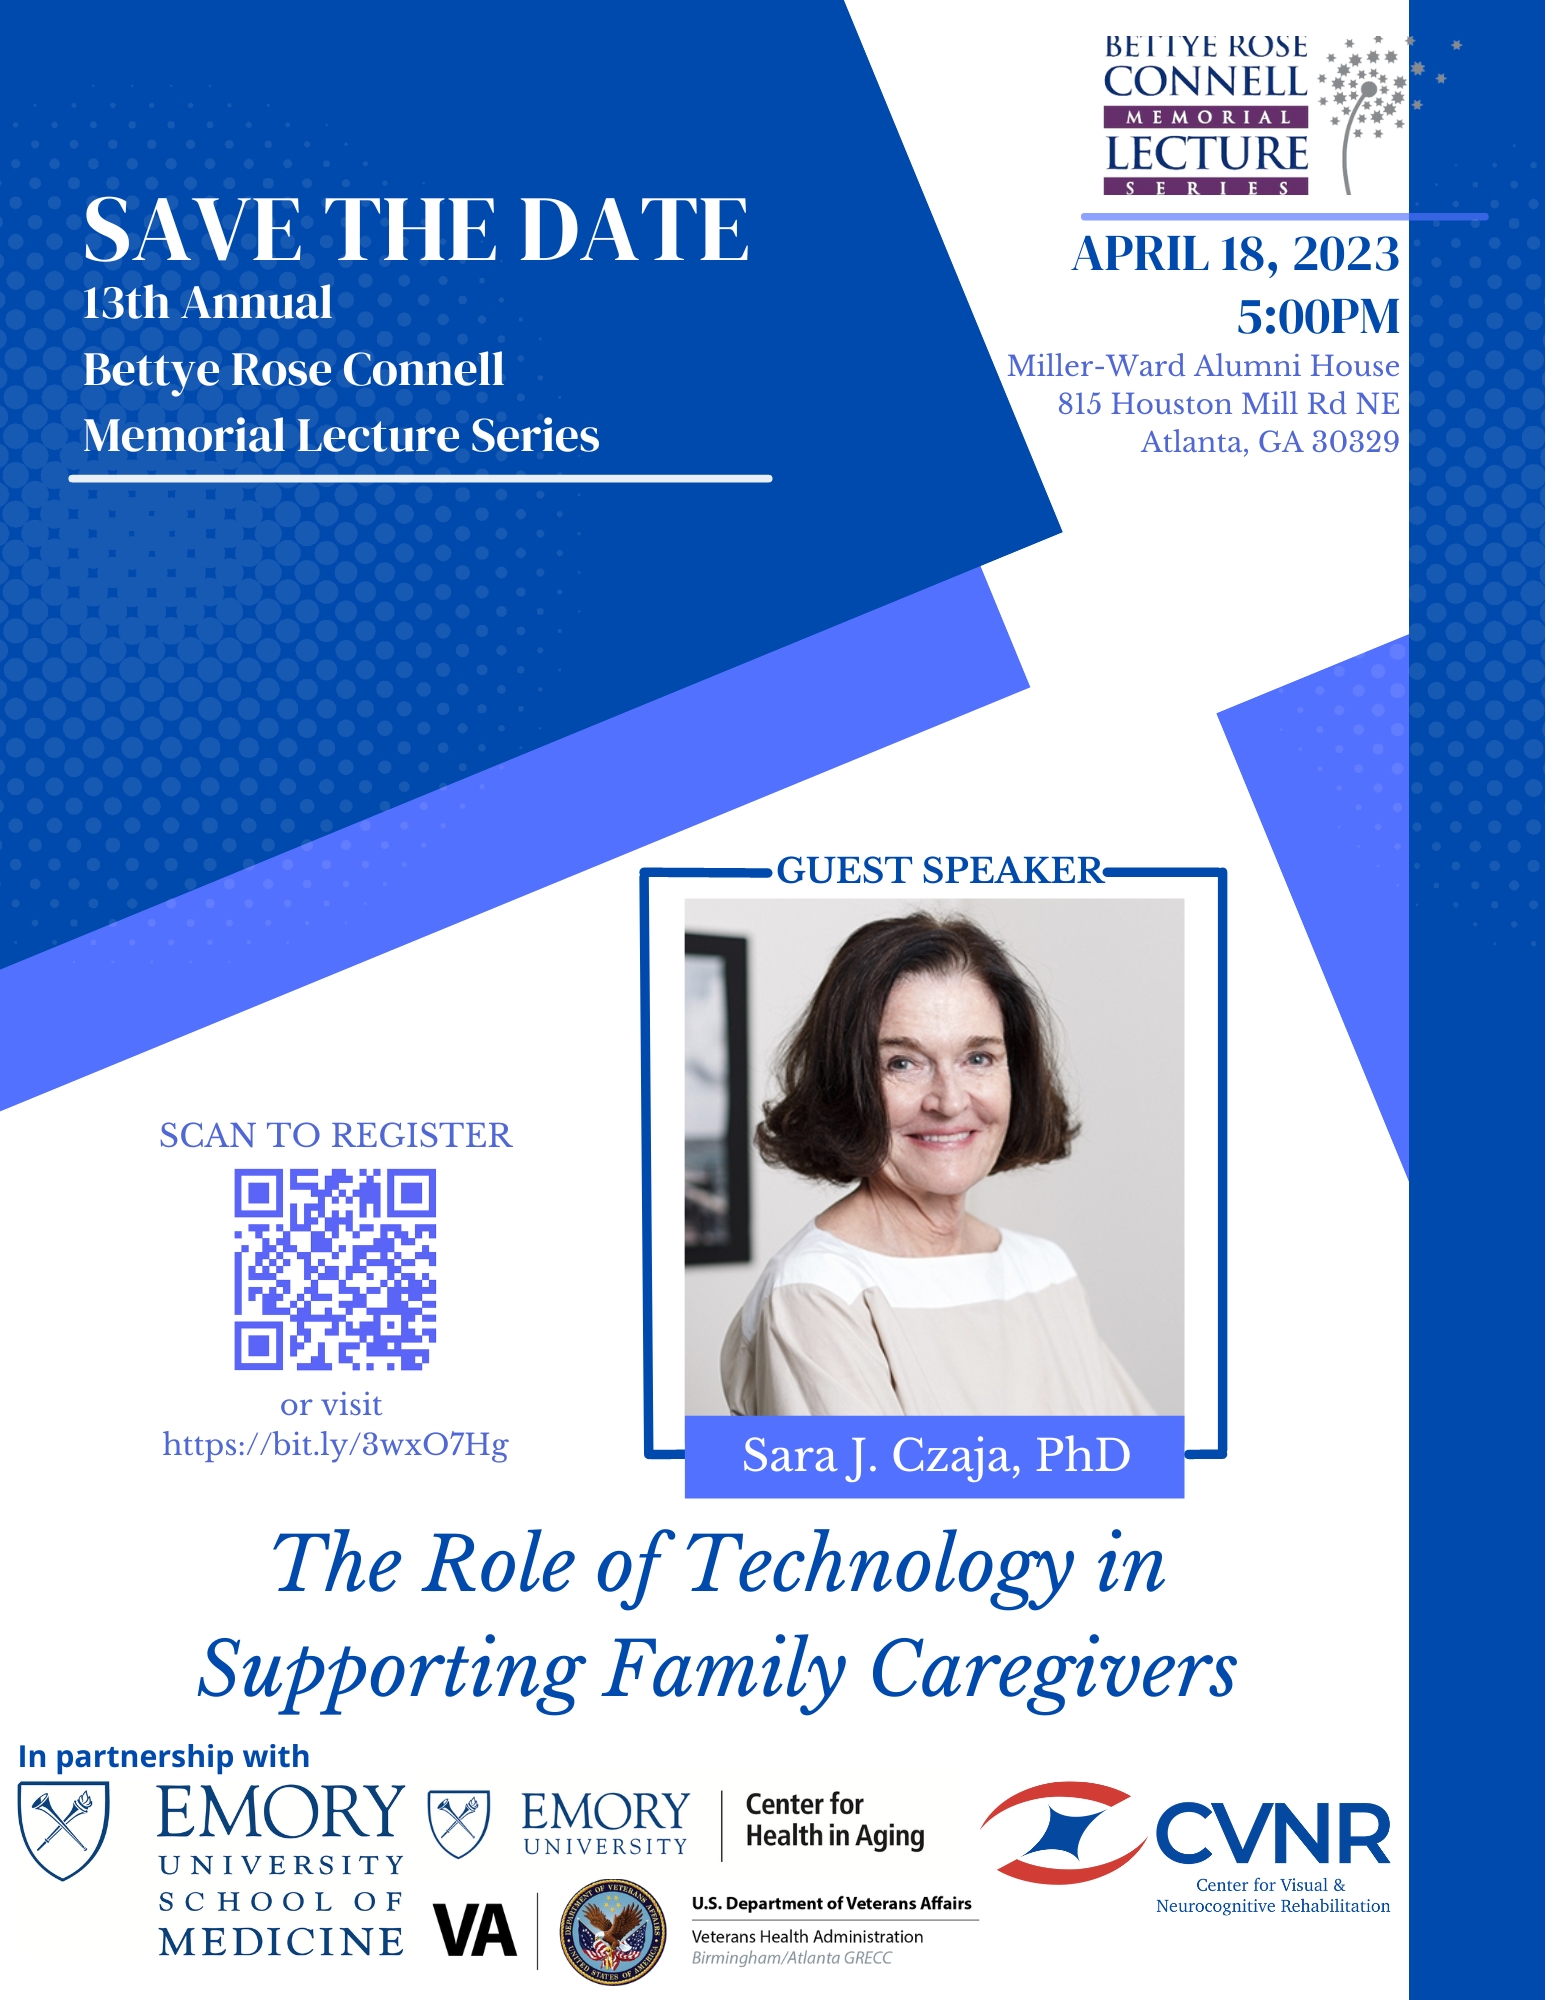 The Role of Technology in Supporting Family Caregivers